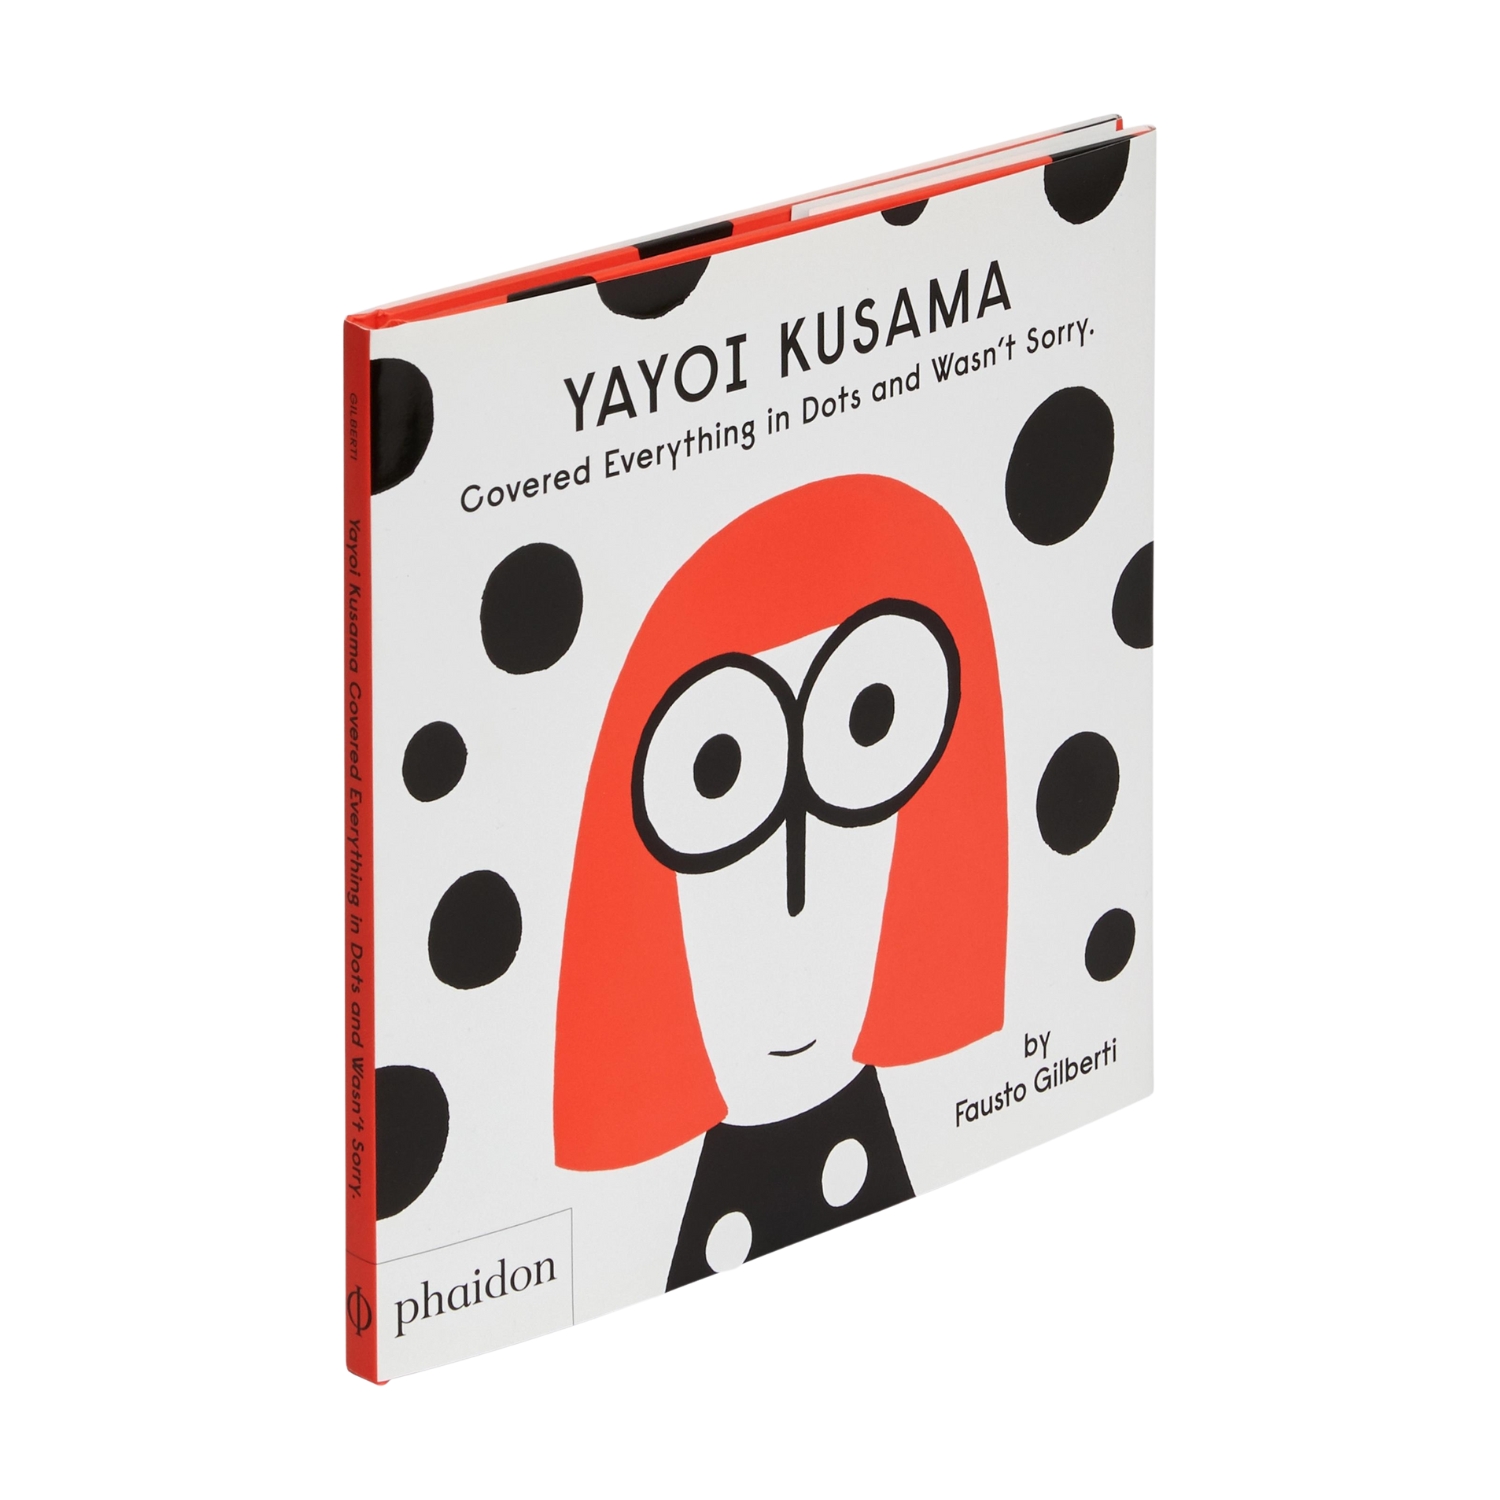 Phaidon Yayoi Kusama Covered Everything in Dots and Wasn’t Sorry Book by Fausto Gilberti